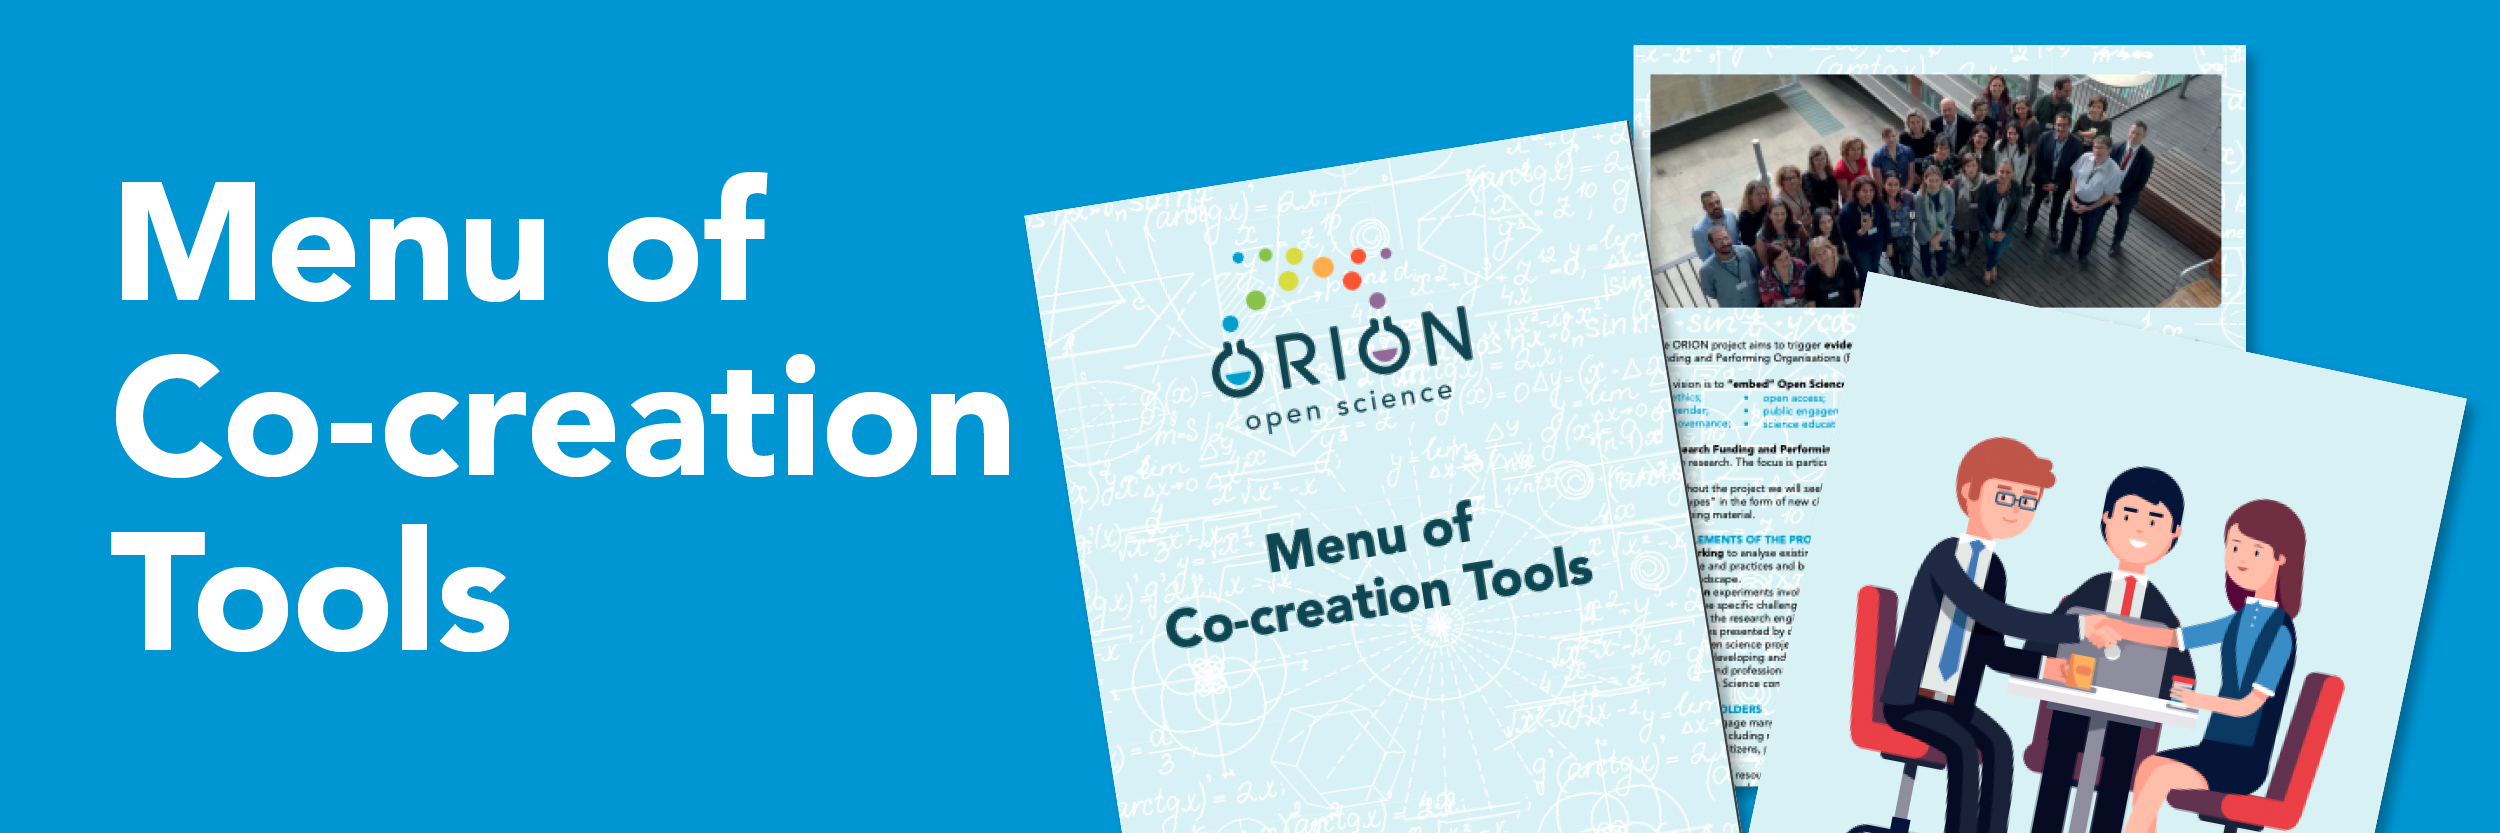 ORION Menu of co-creation tools